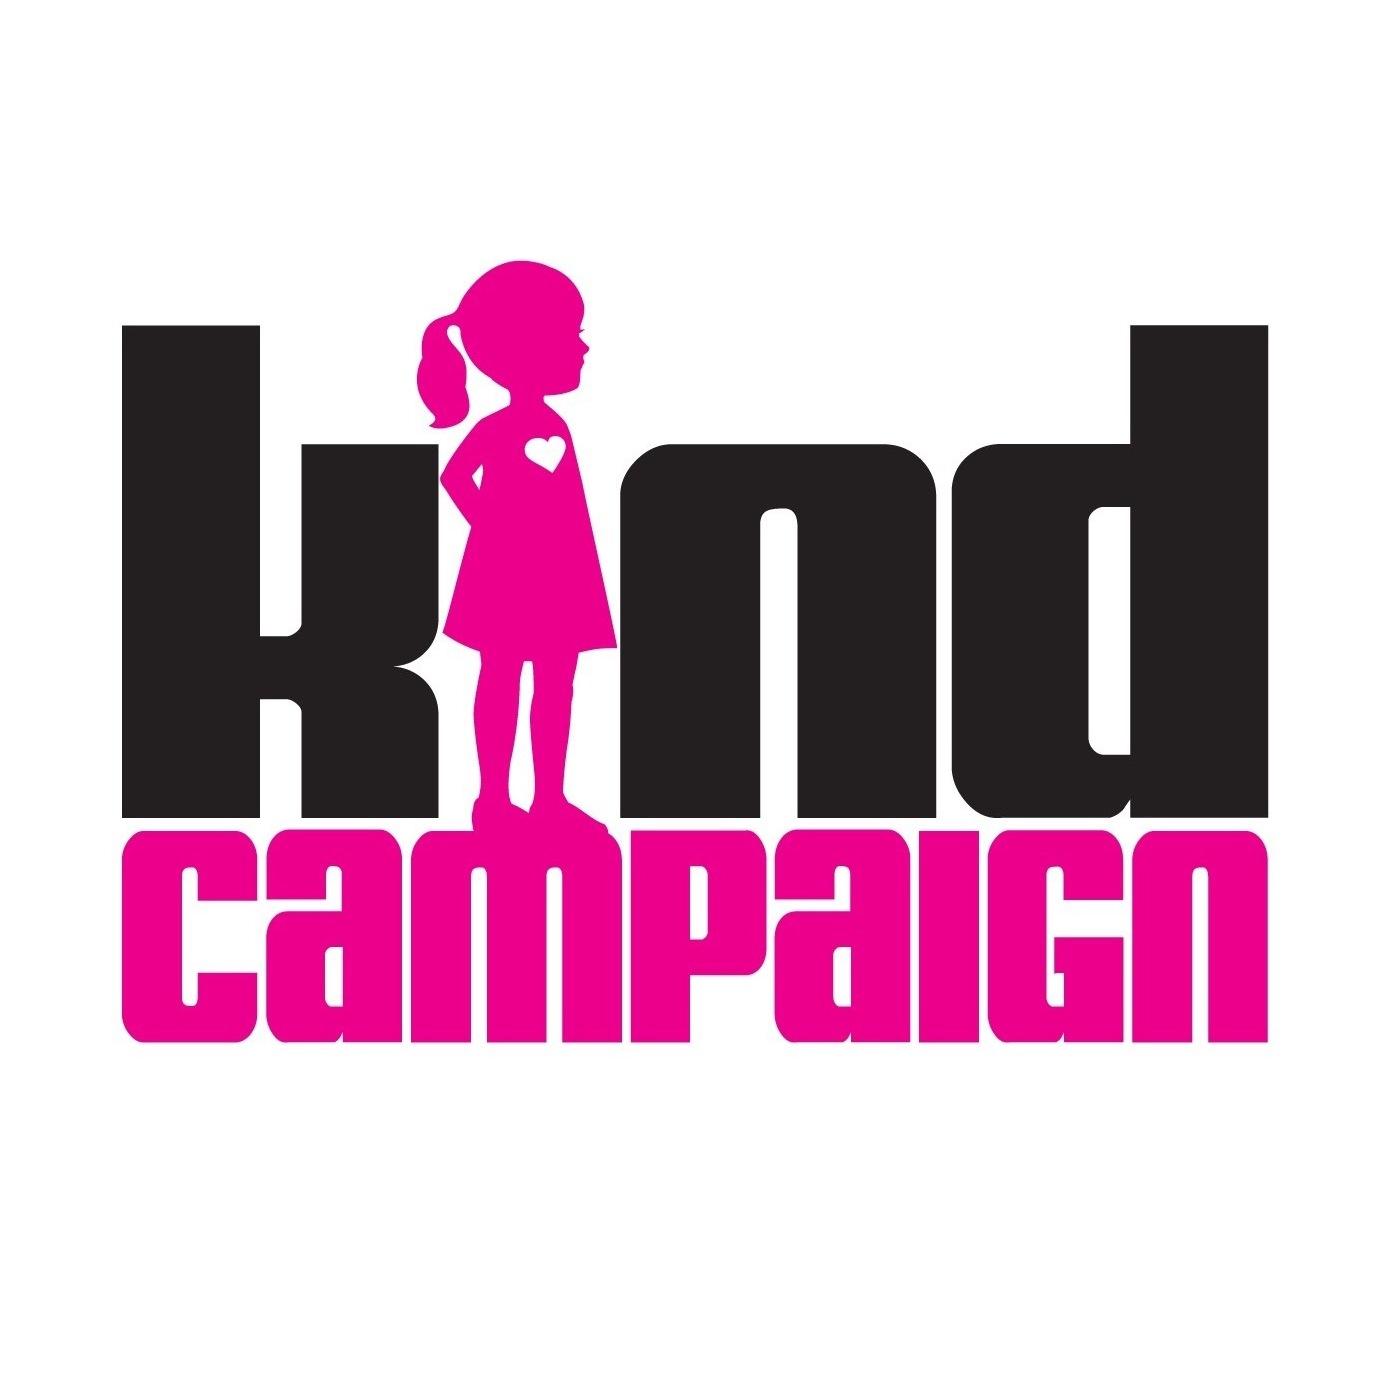 Kind Campaign: A Motion to Stop Bullying